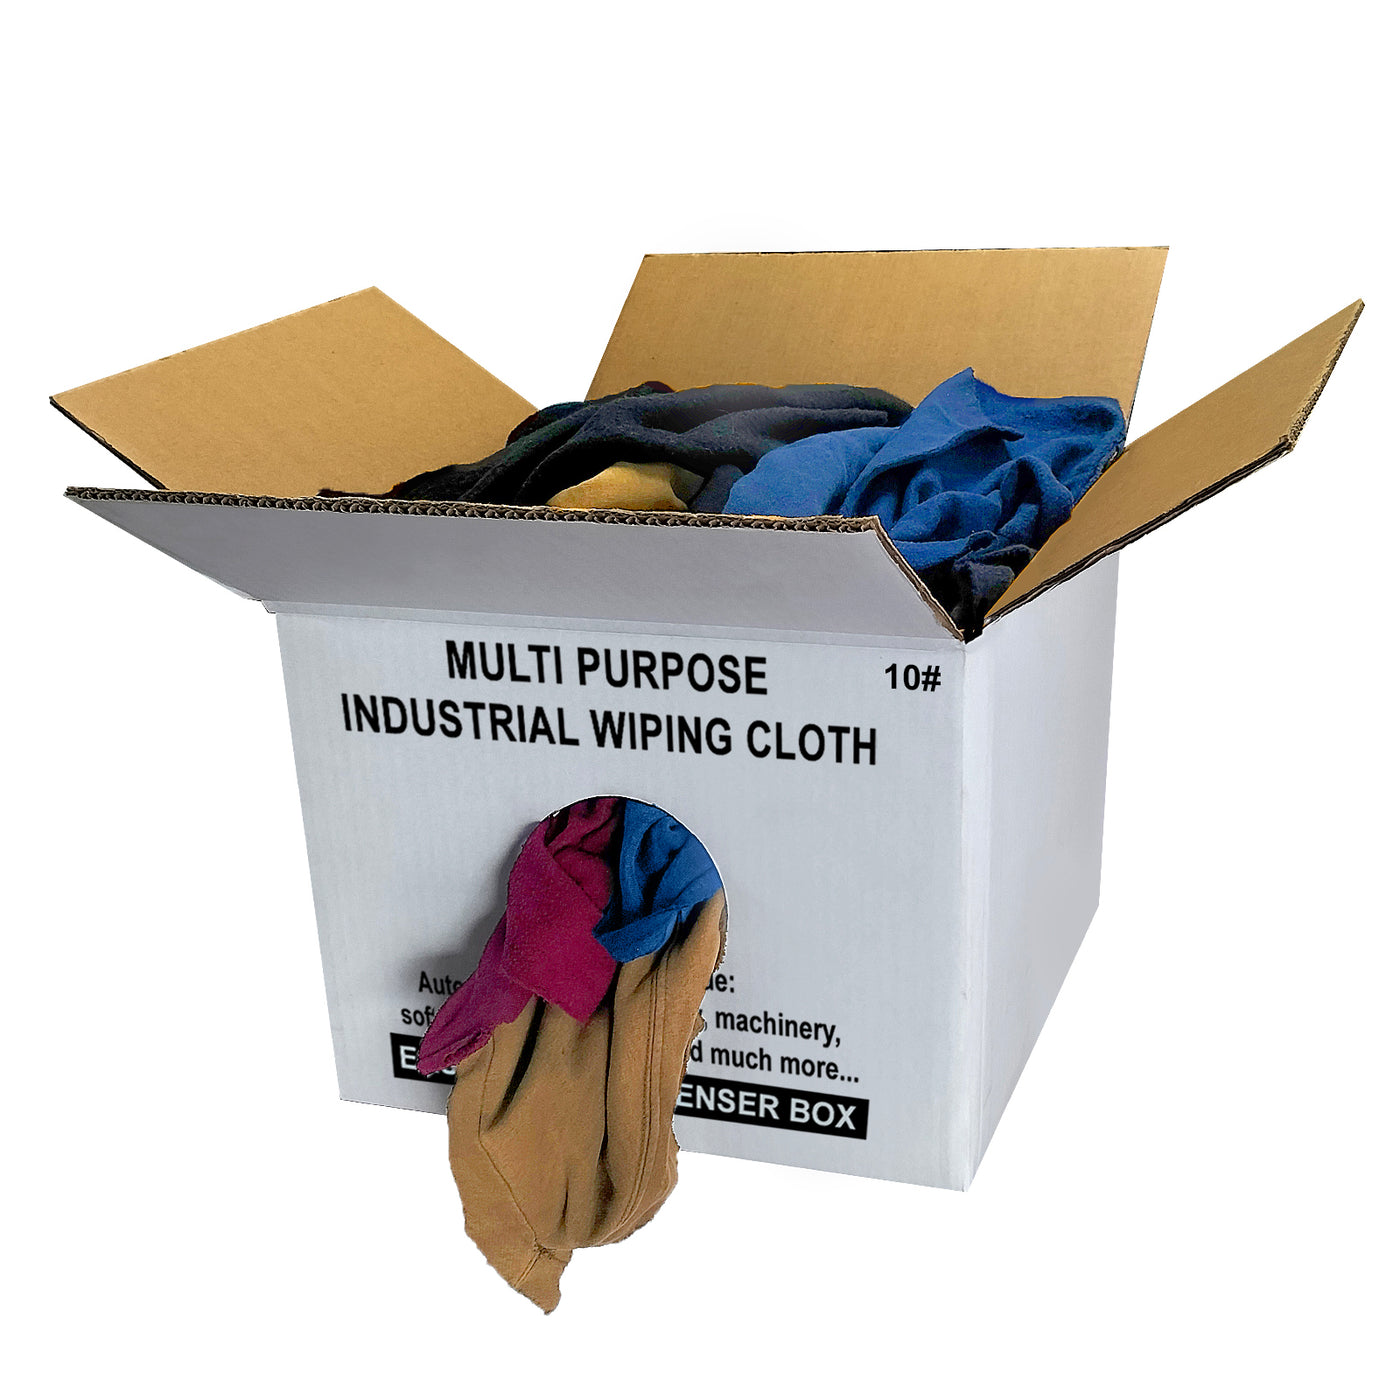 Affordable Wipers Color Fleece 100% Cotton Cleaning Rags - 10 lbs. Box - Multipurpose Cleaning